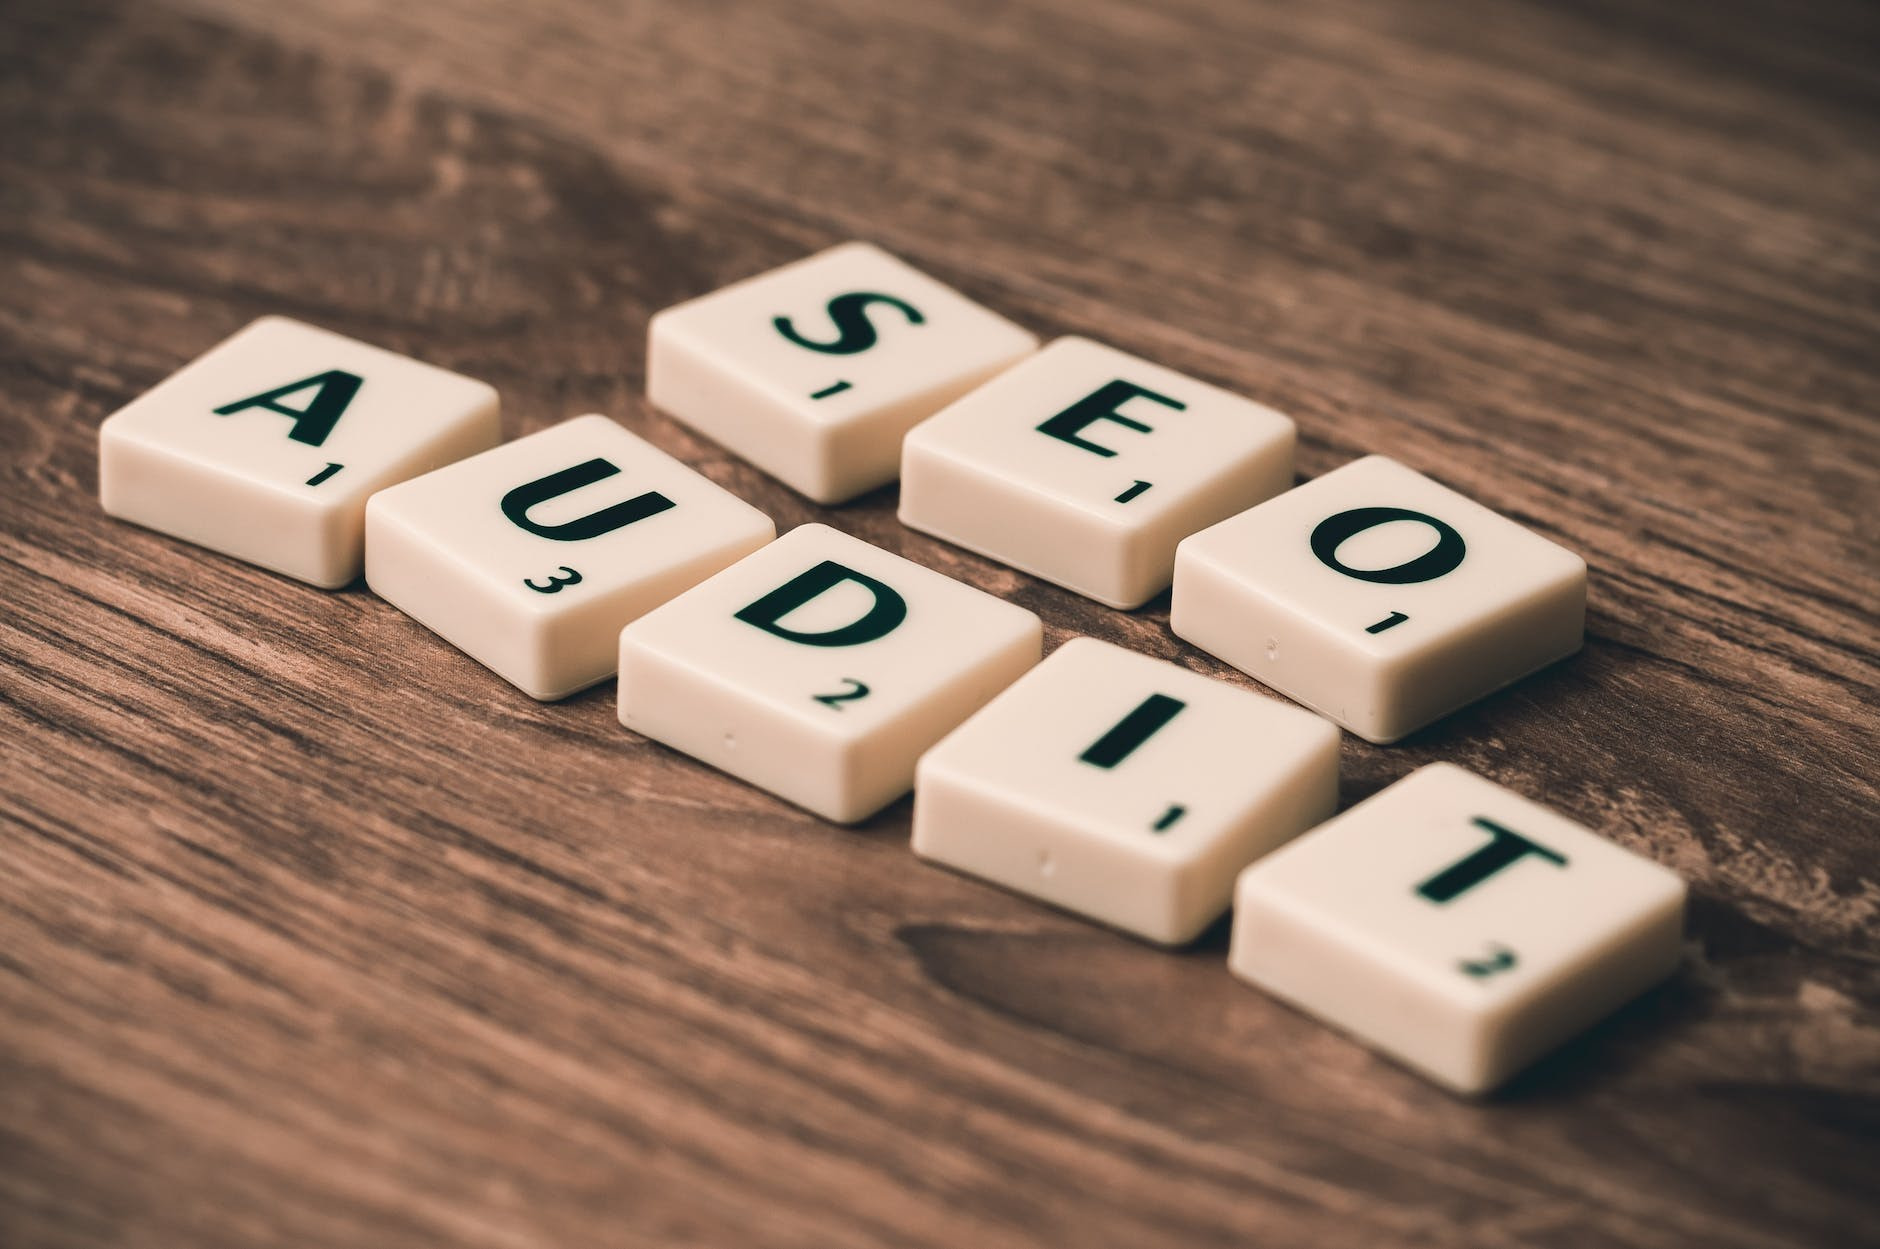 learn seo in nigeria: audit white blocks on brown wooden surface